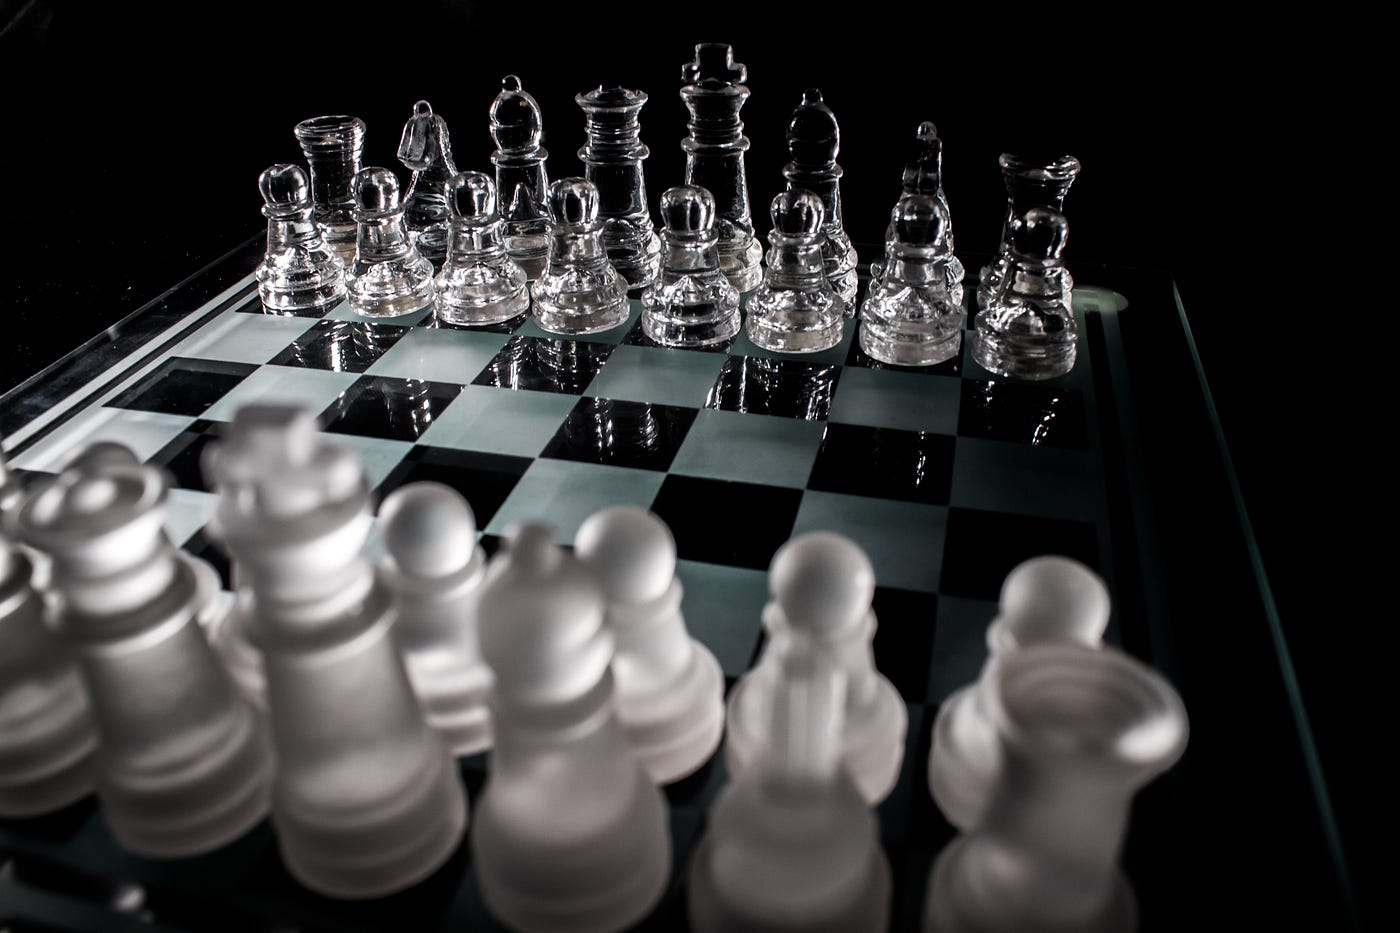 How can chess strategies be applied to real life? - Quora